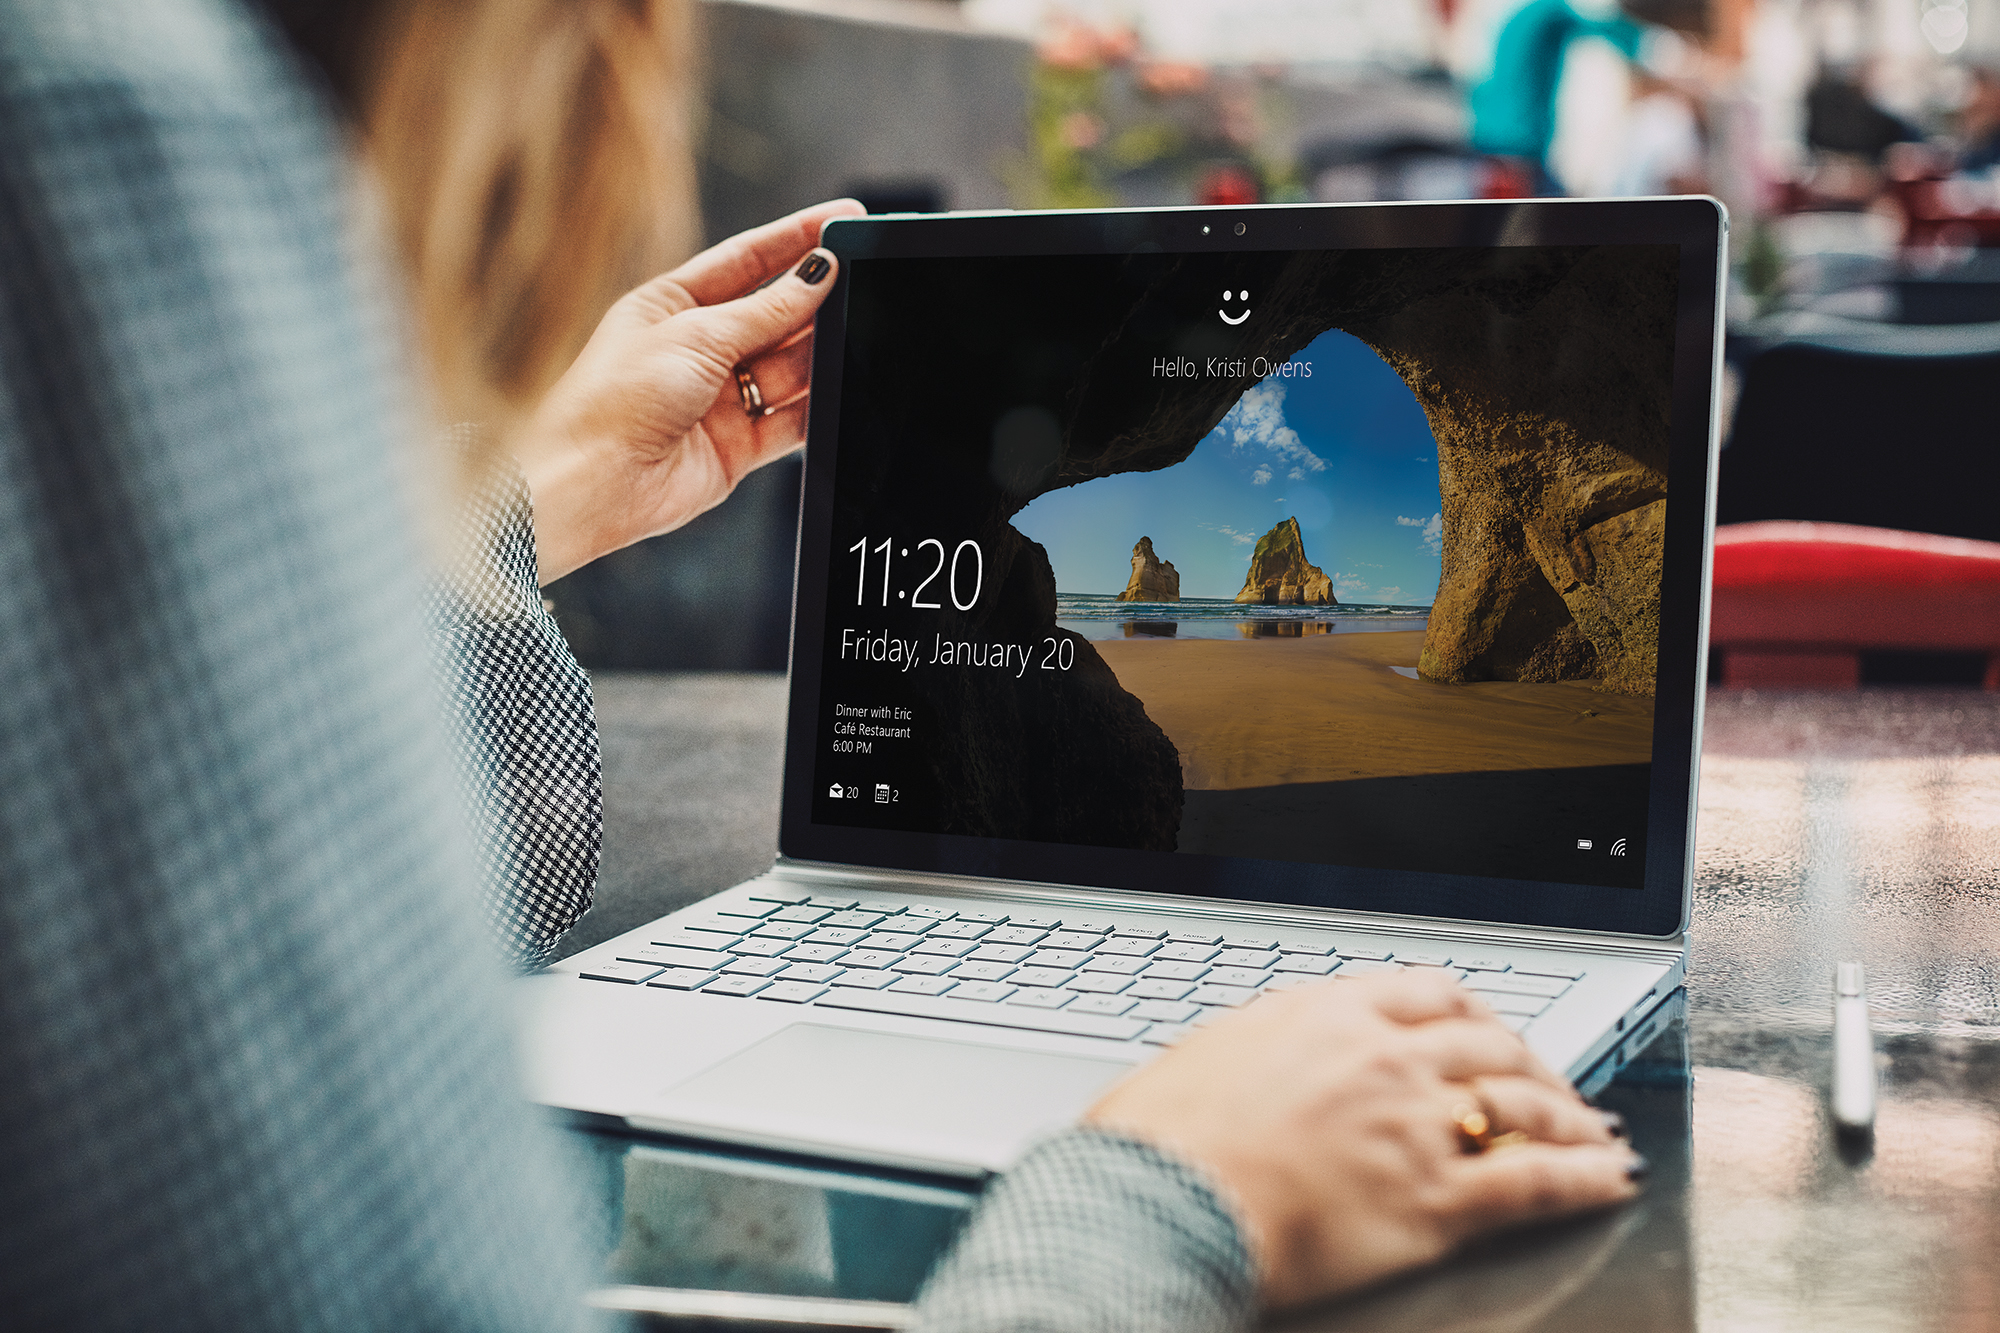 A woman uses Windows Hello on her laptop